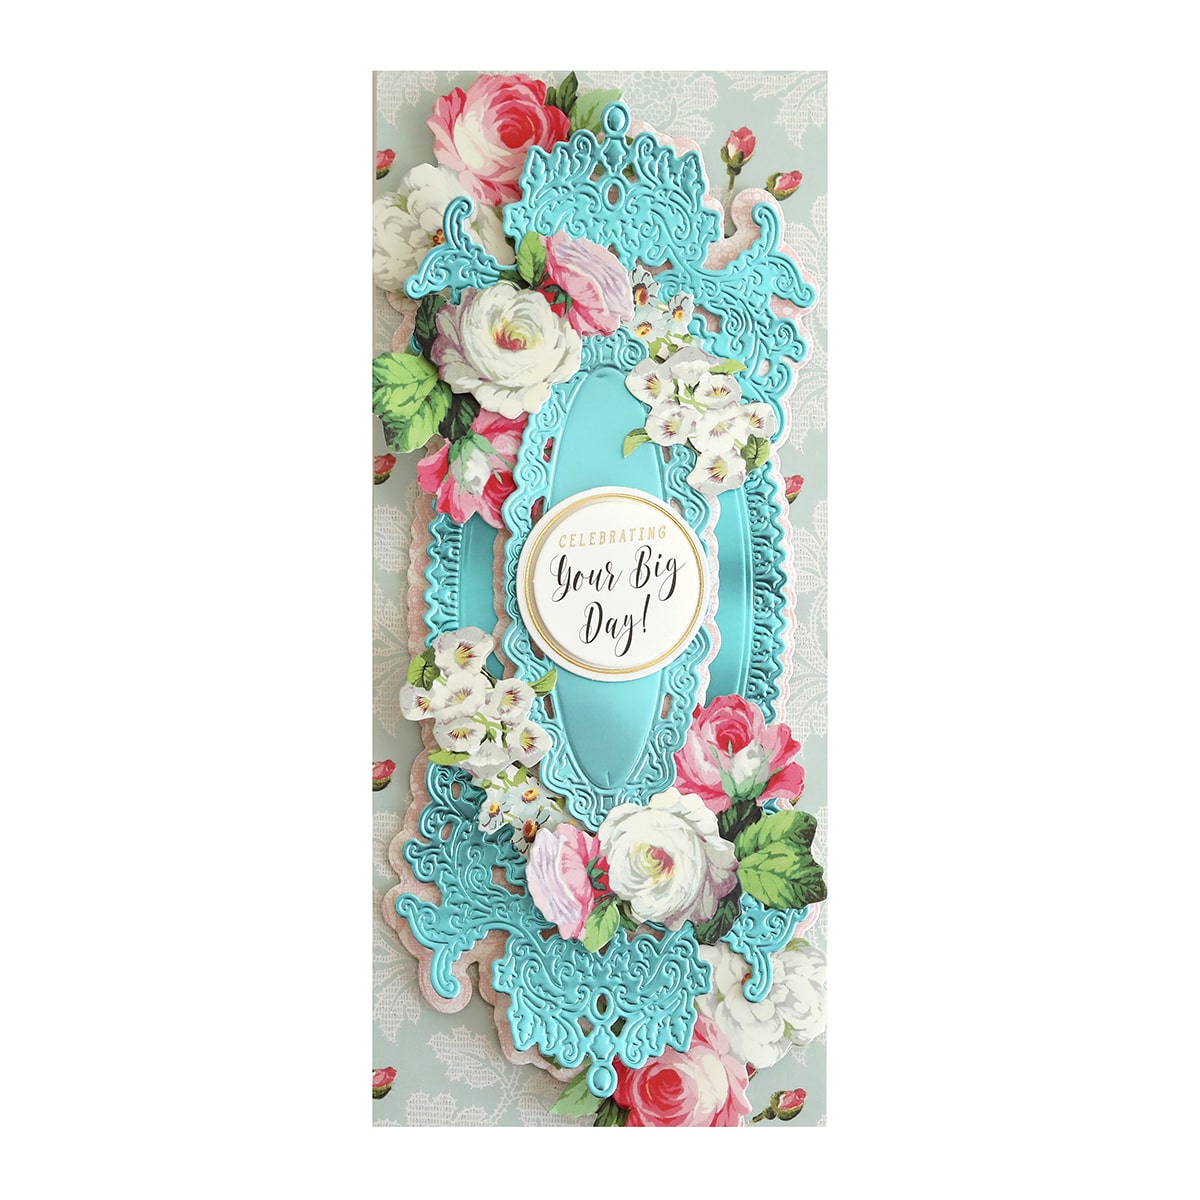 A blue and white card with flowers and a sentiment.